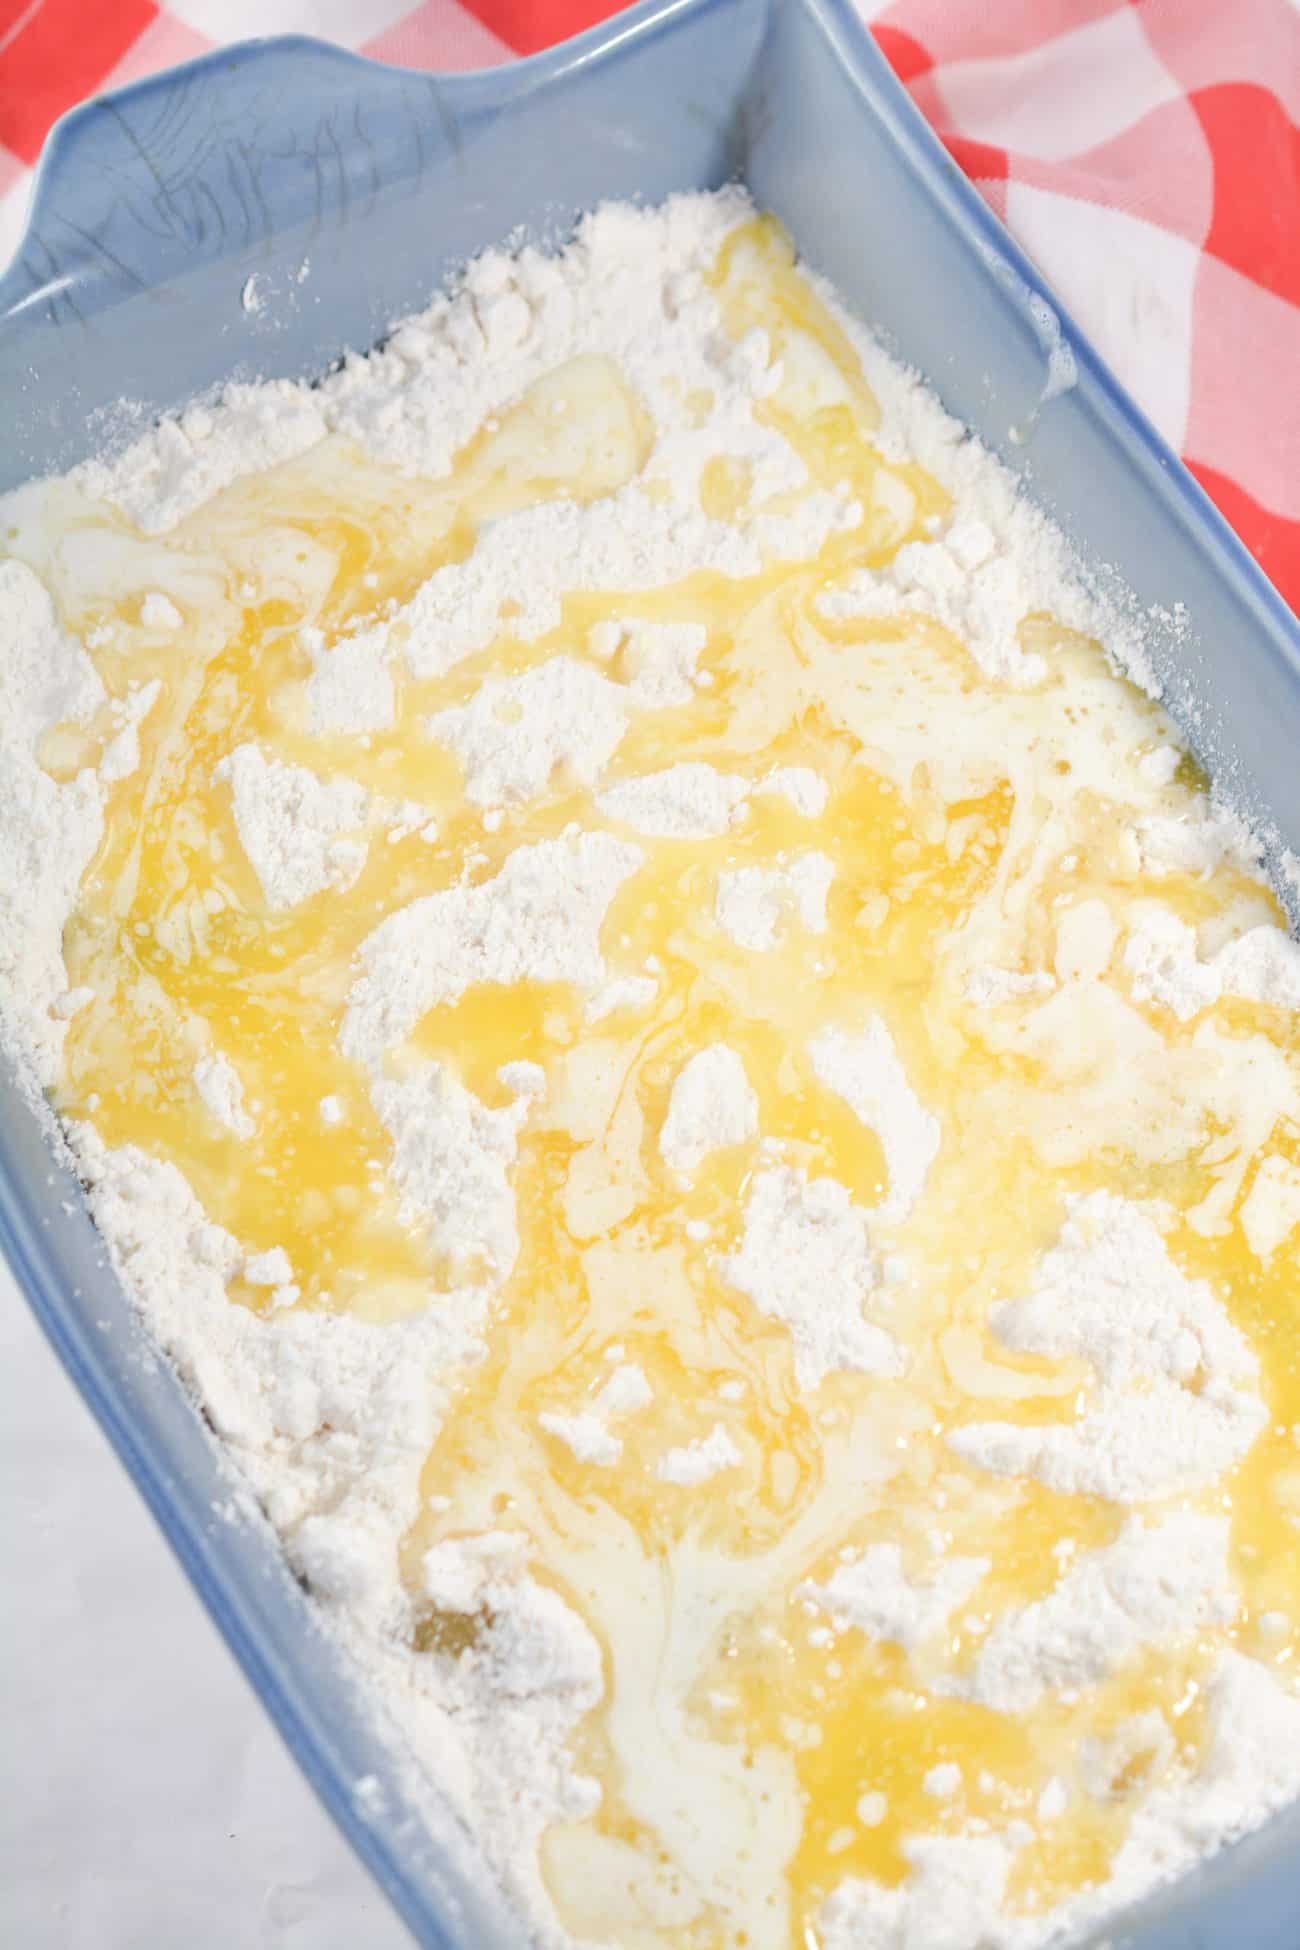 Drizzle the butter over the top of the cake mix.